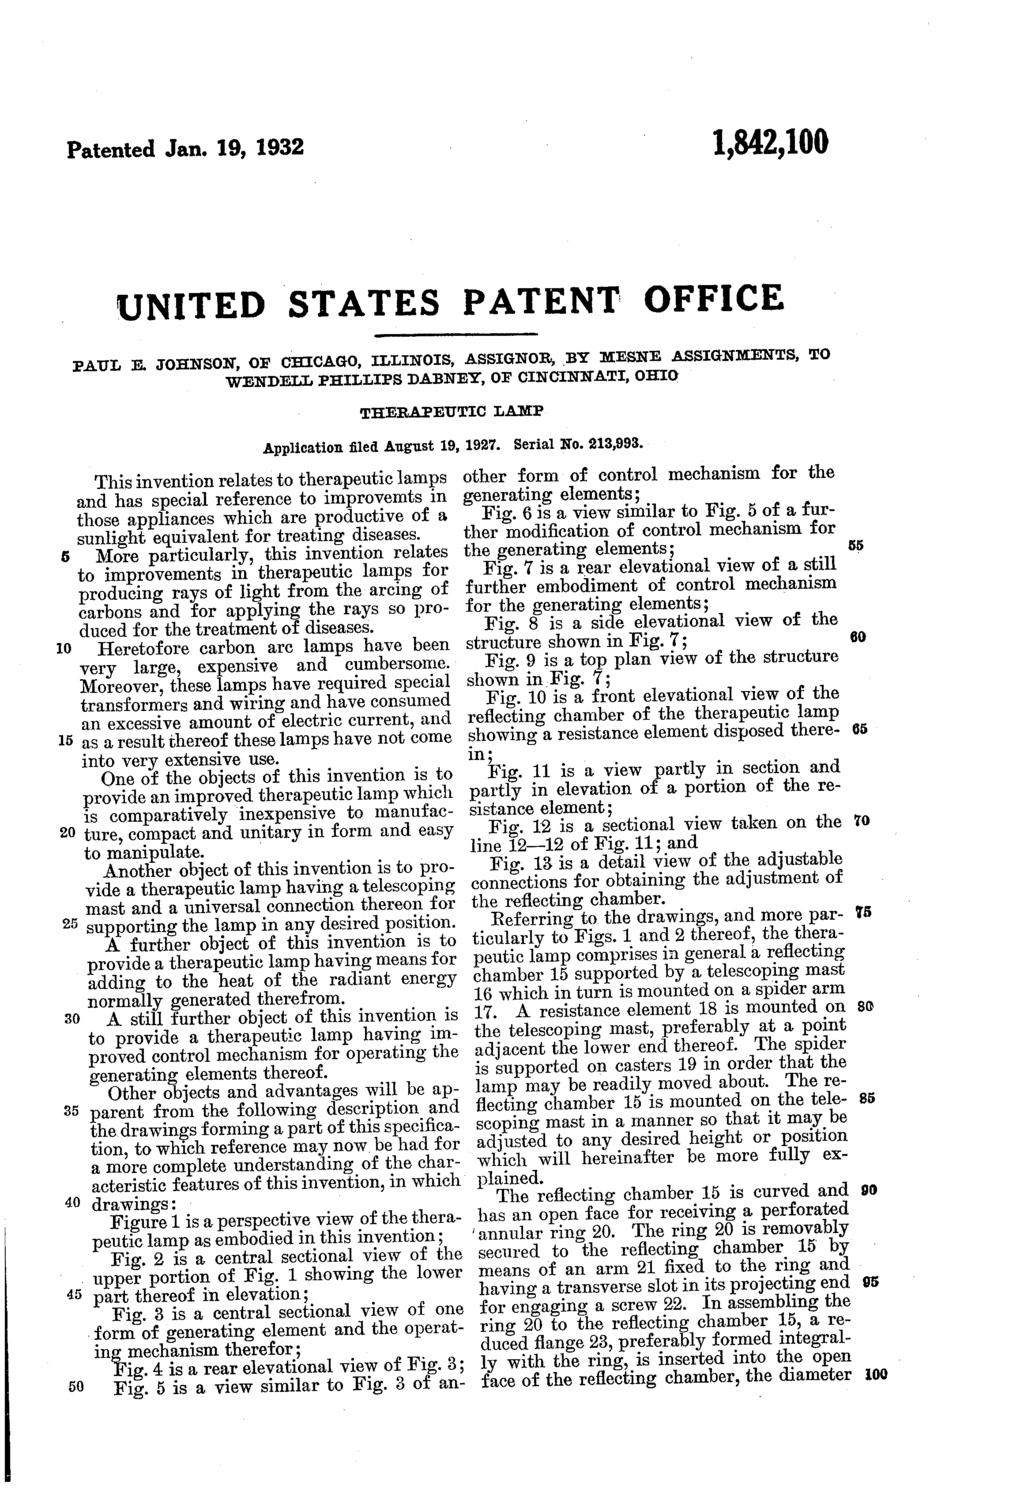 Patented Jan. 19, 1932 UNITED STATES PATENT OFFICE PAUL E.